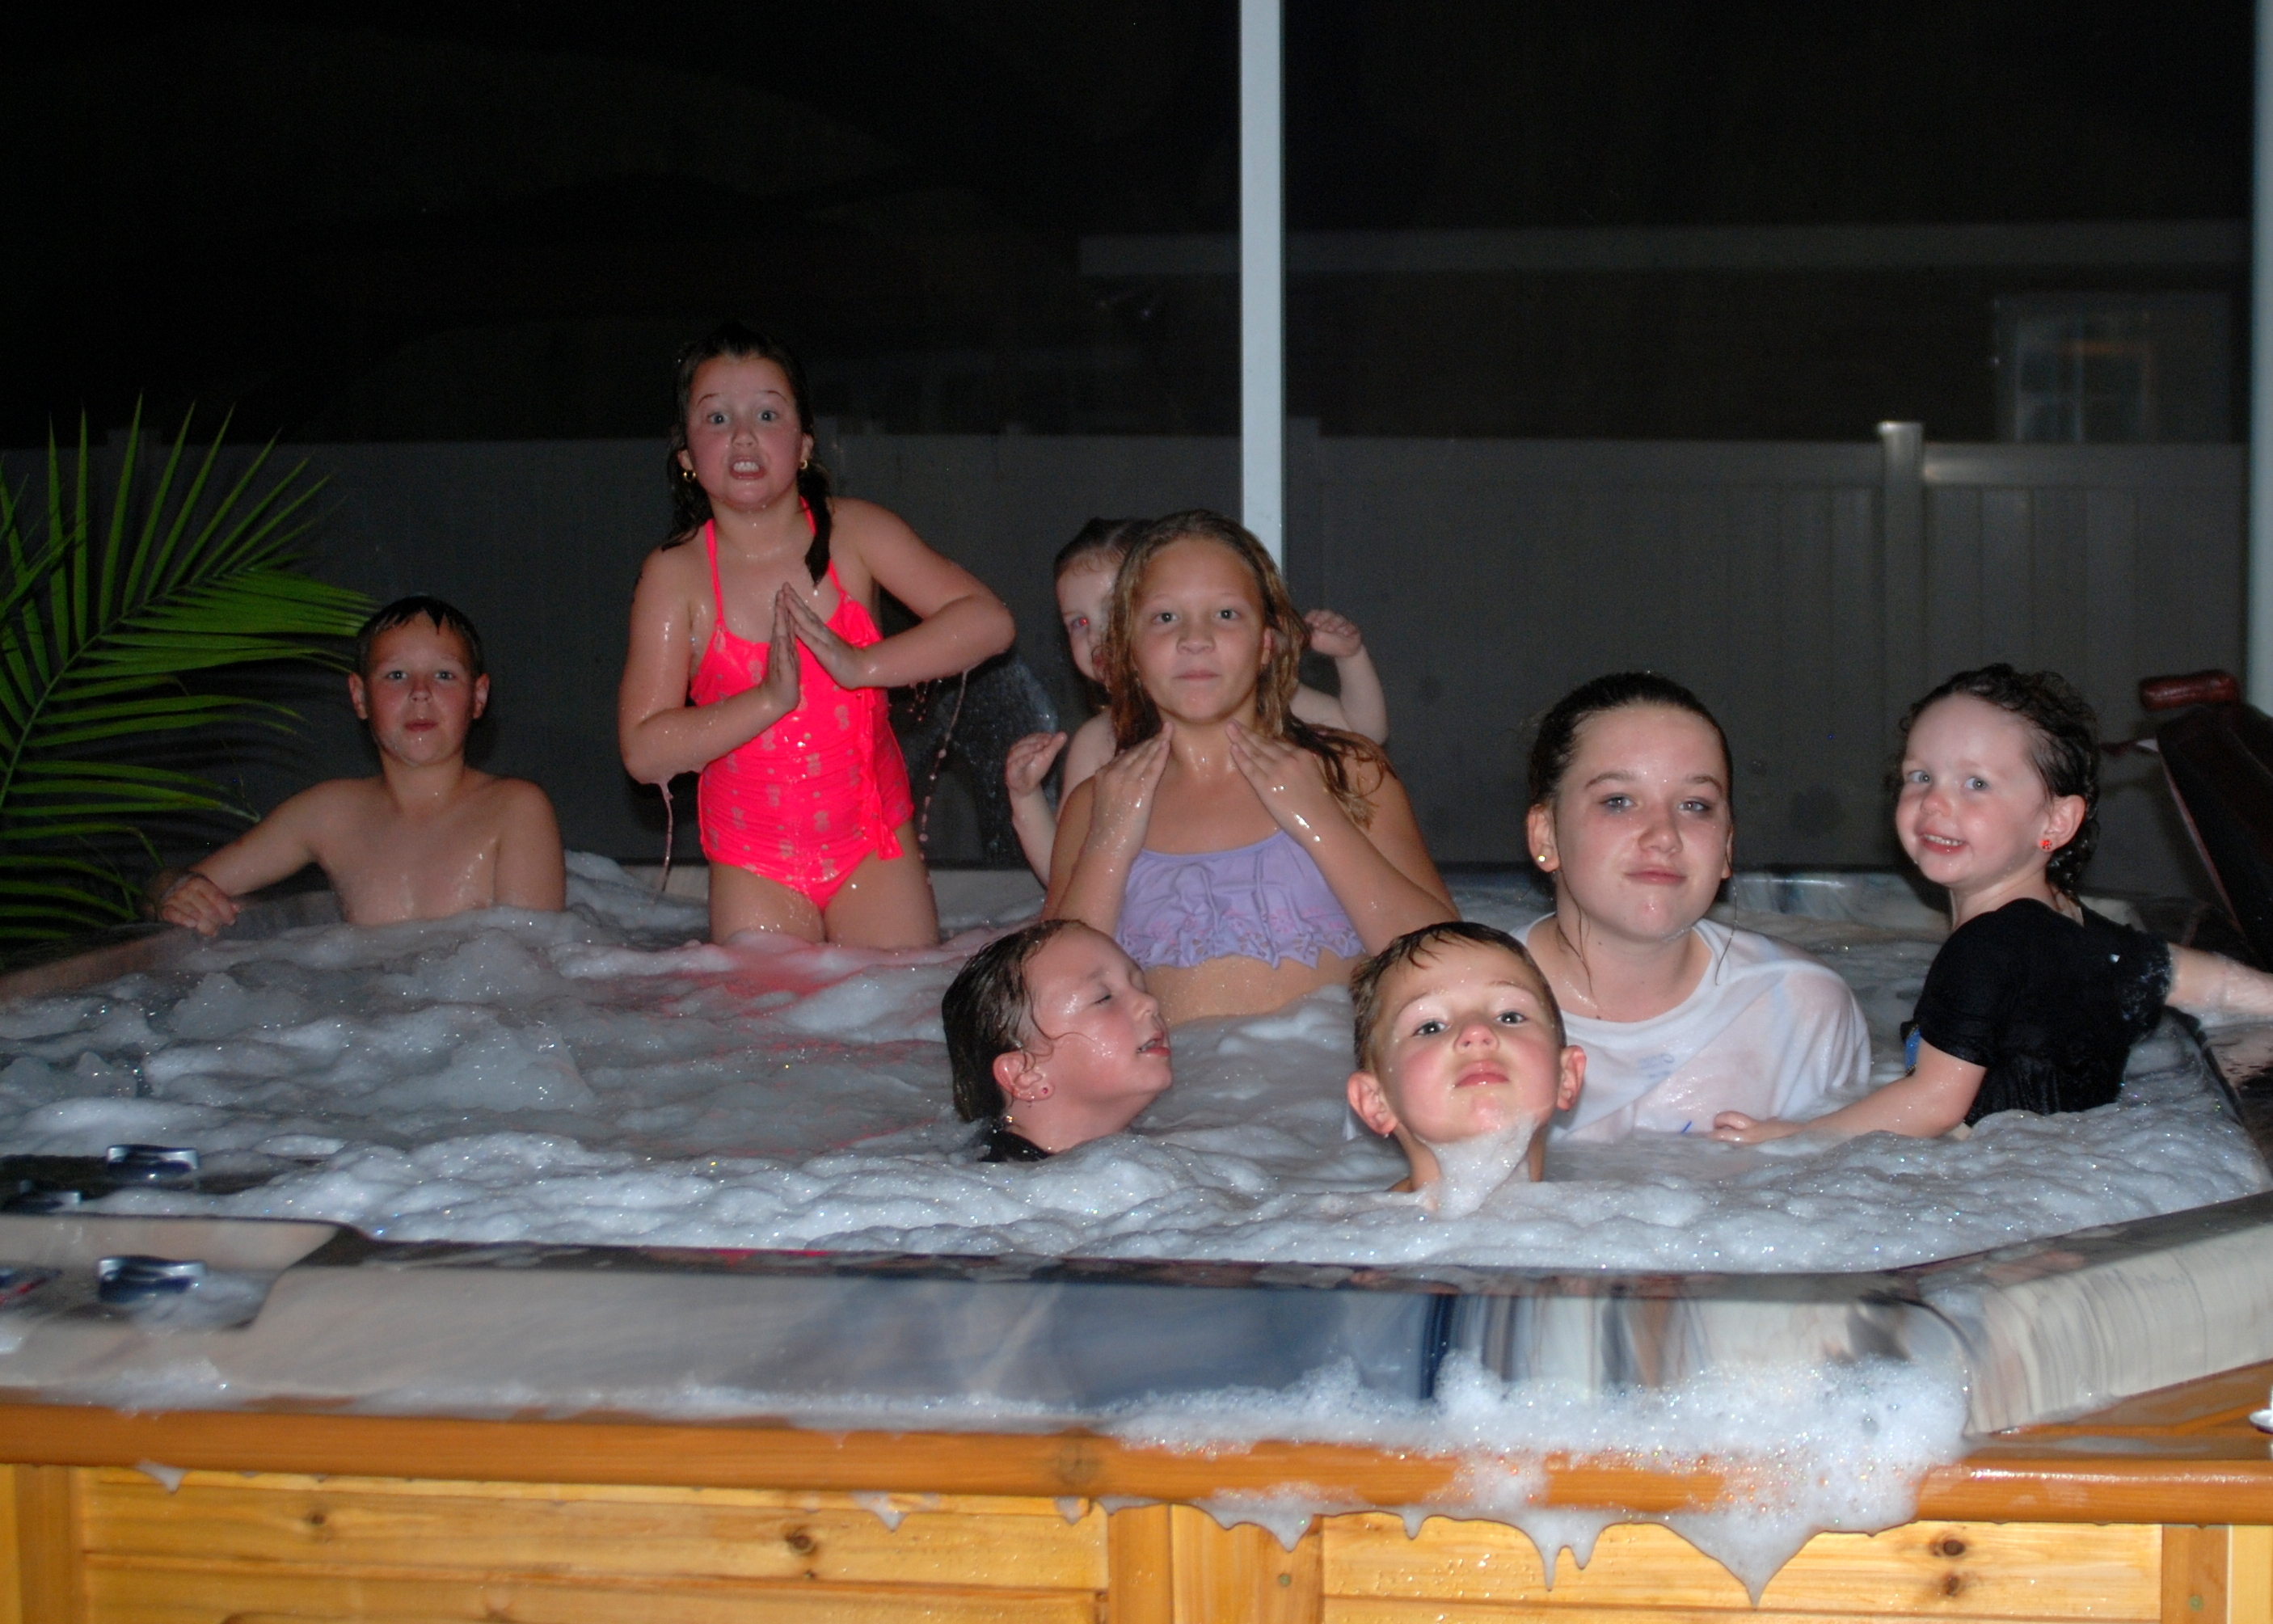 How many cousins can fit in the hot tub?